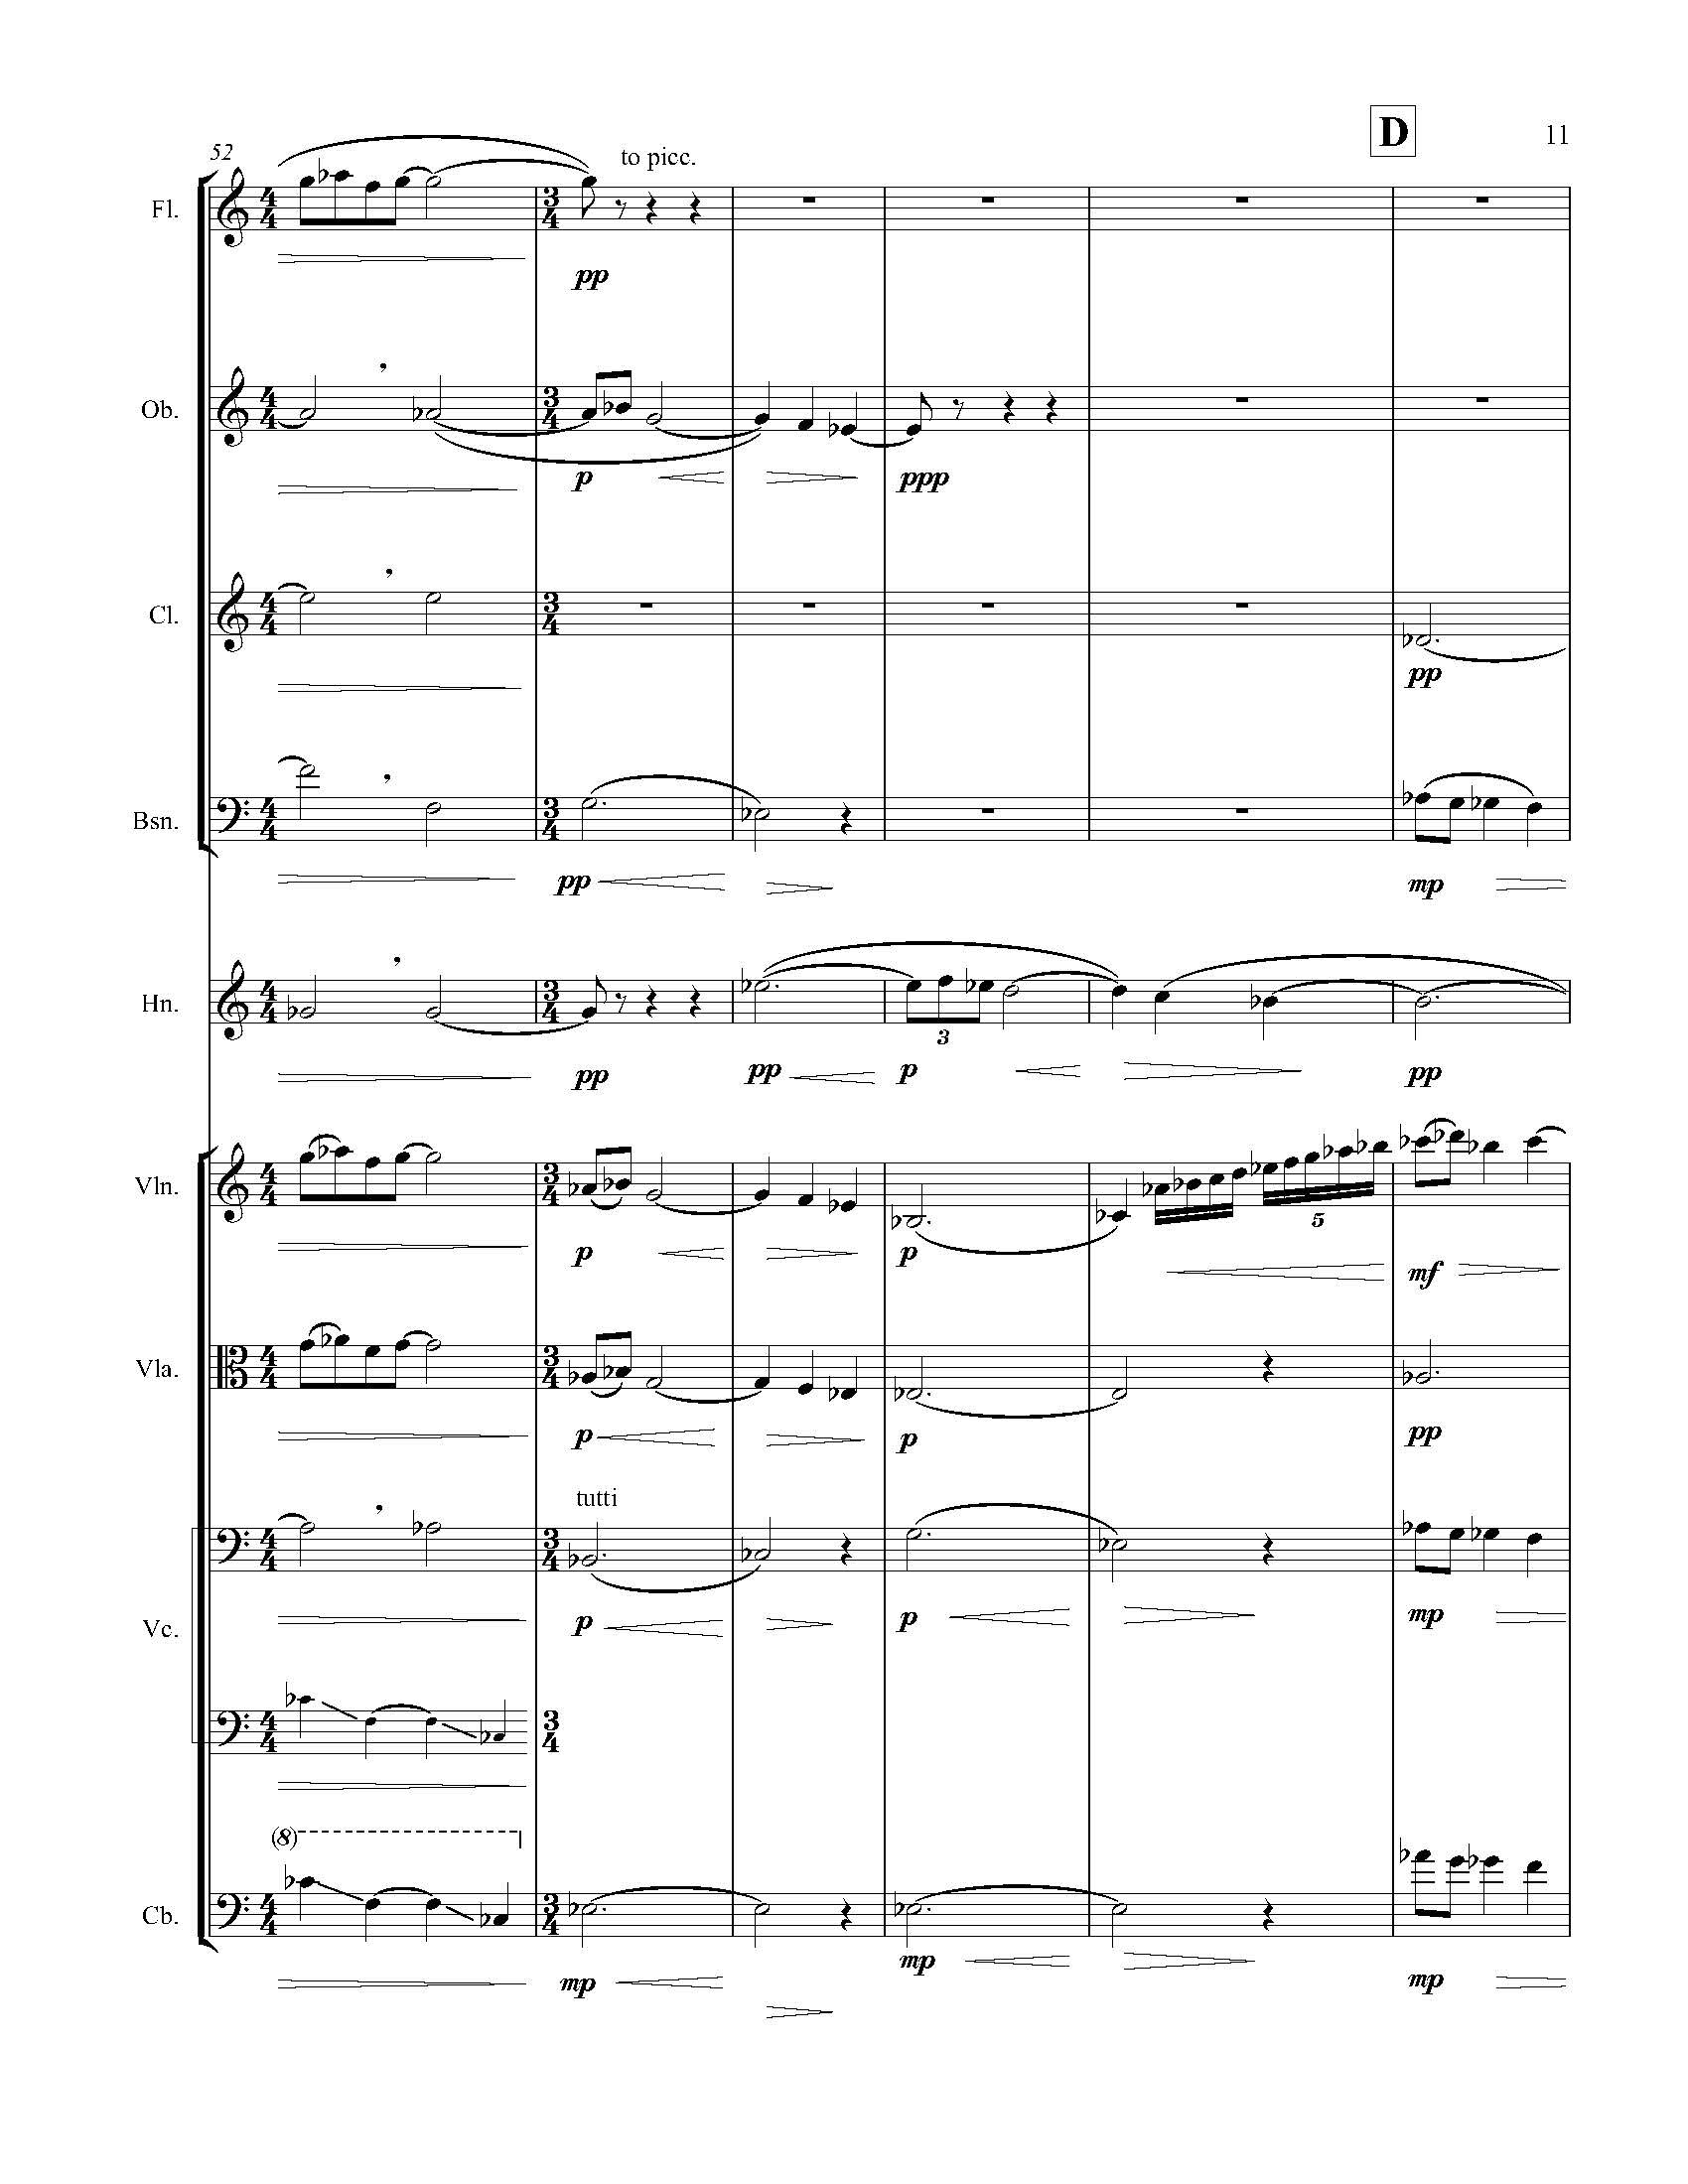 In Search of a Bird - Complete Score_Page_17.jpg